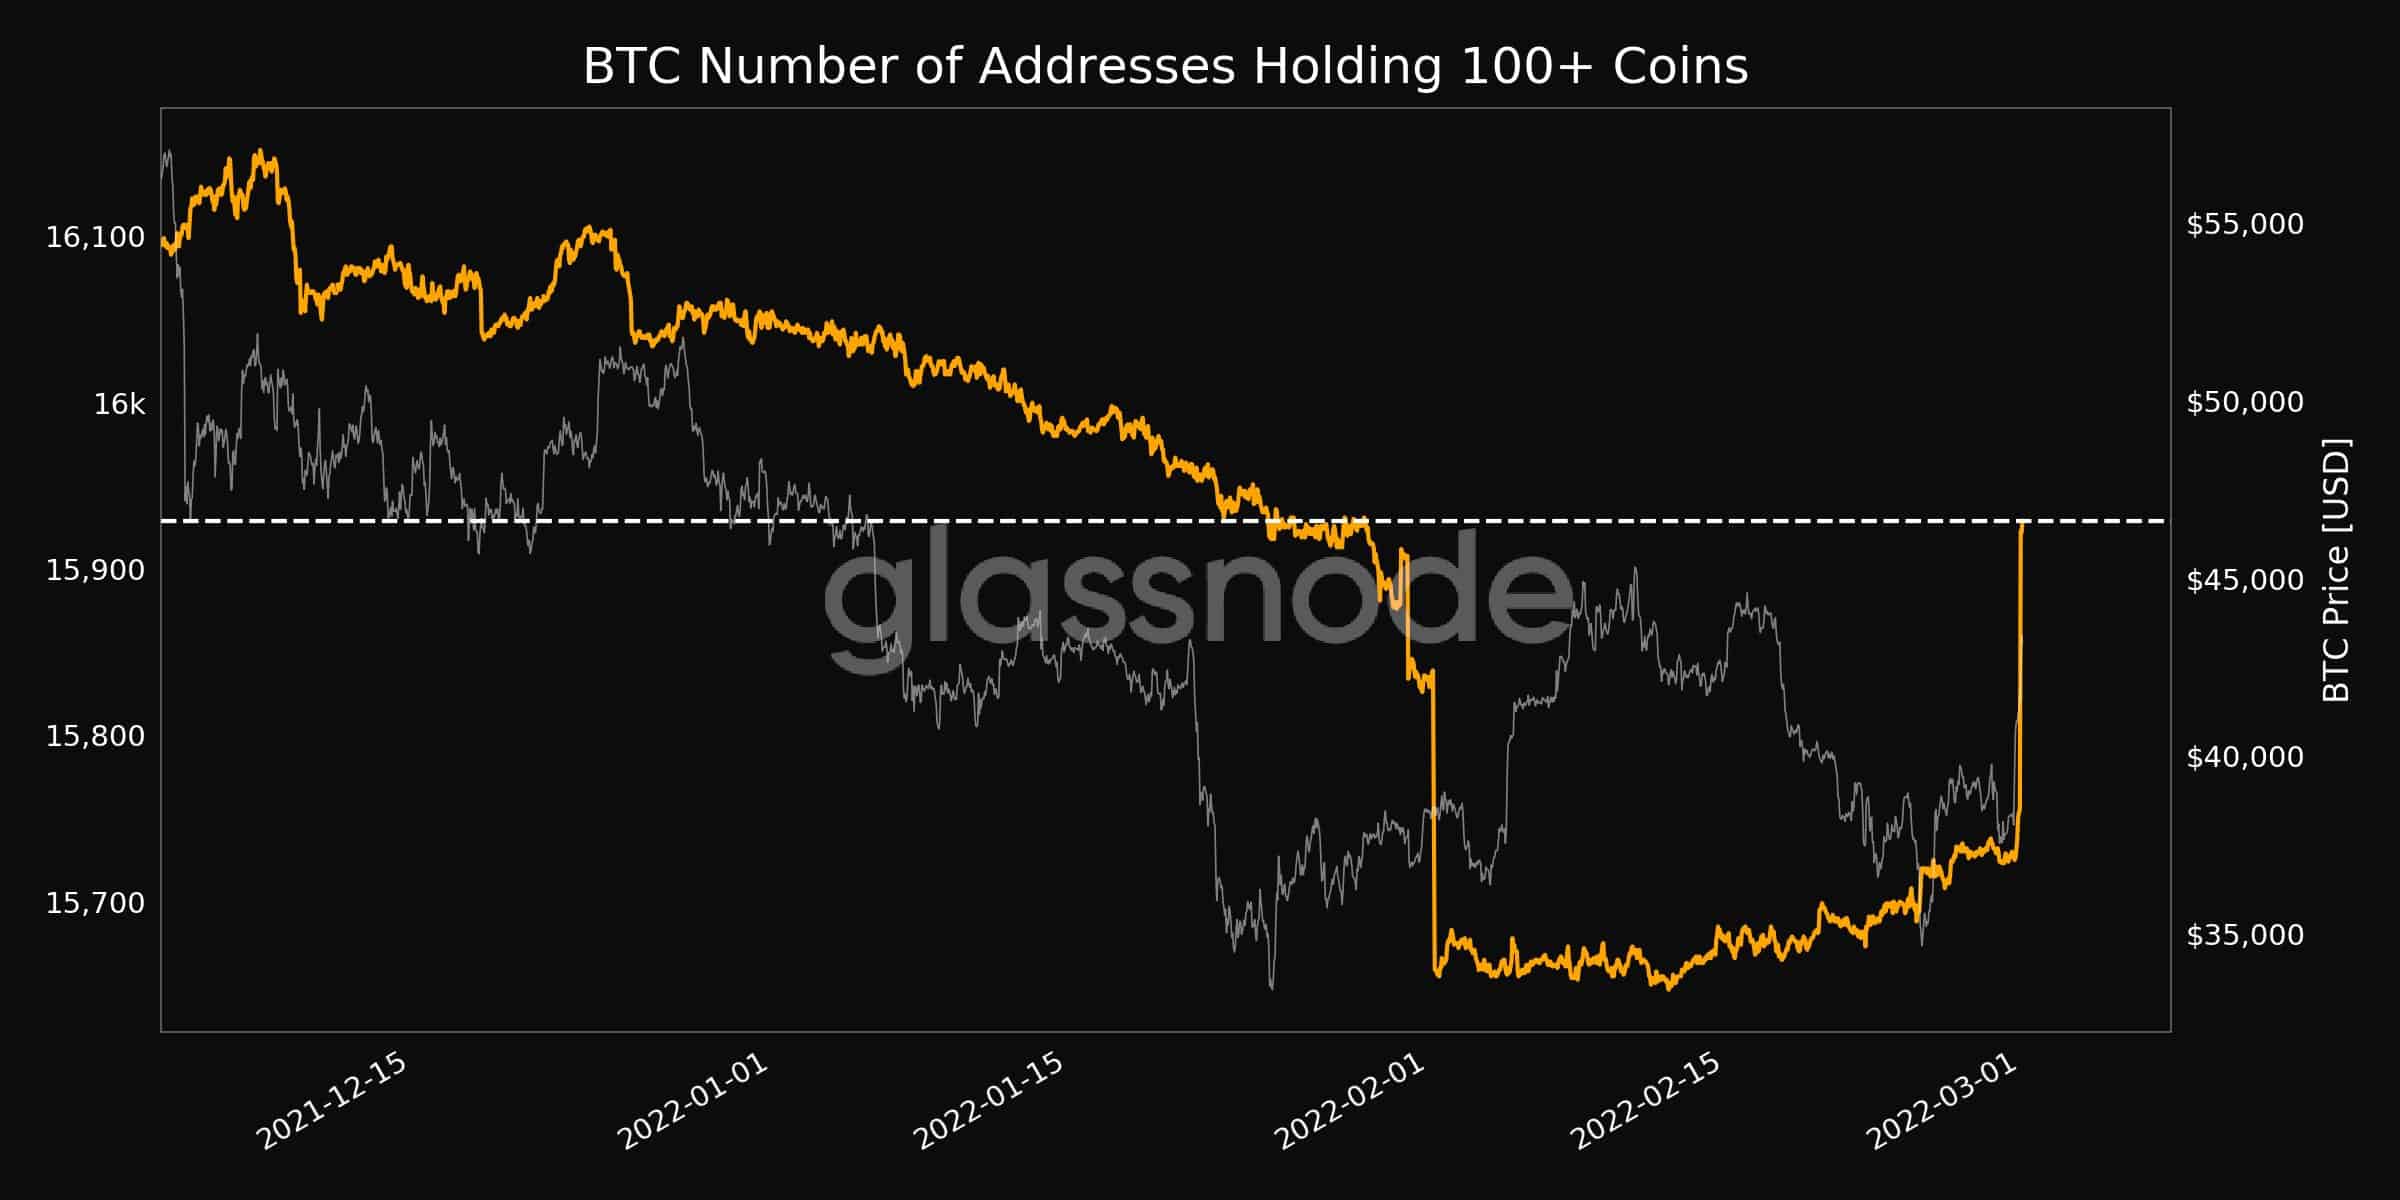 Bitcoin Addresses With 100+ Coins. Source: Glassnode